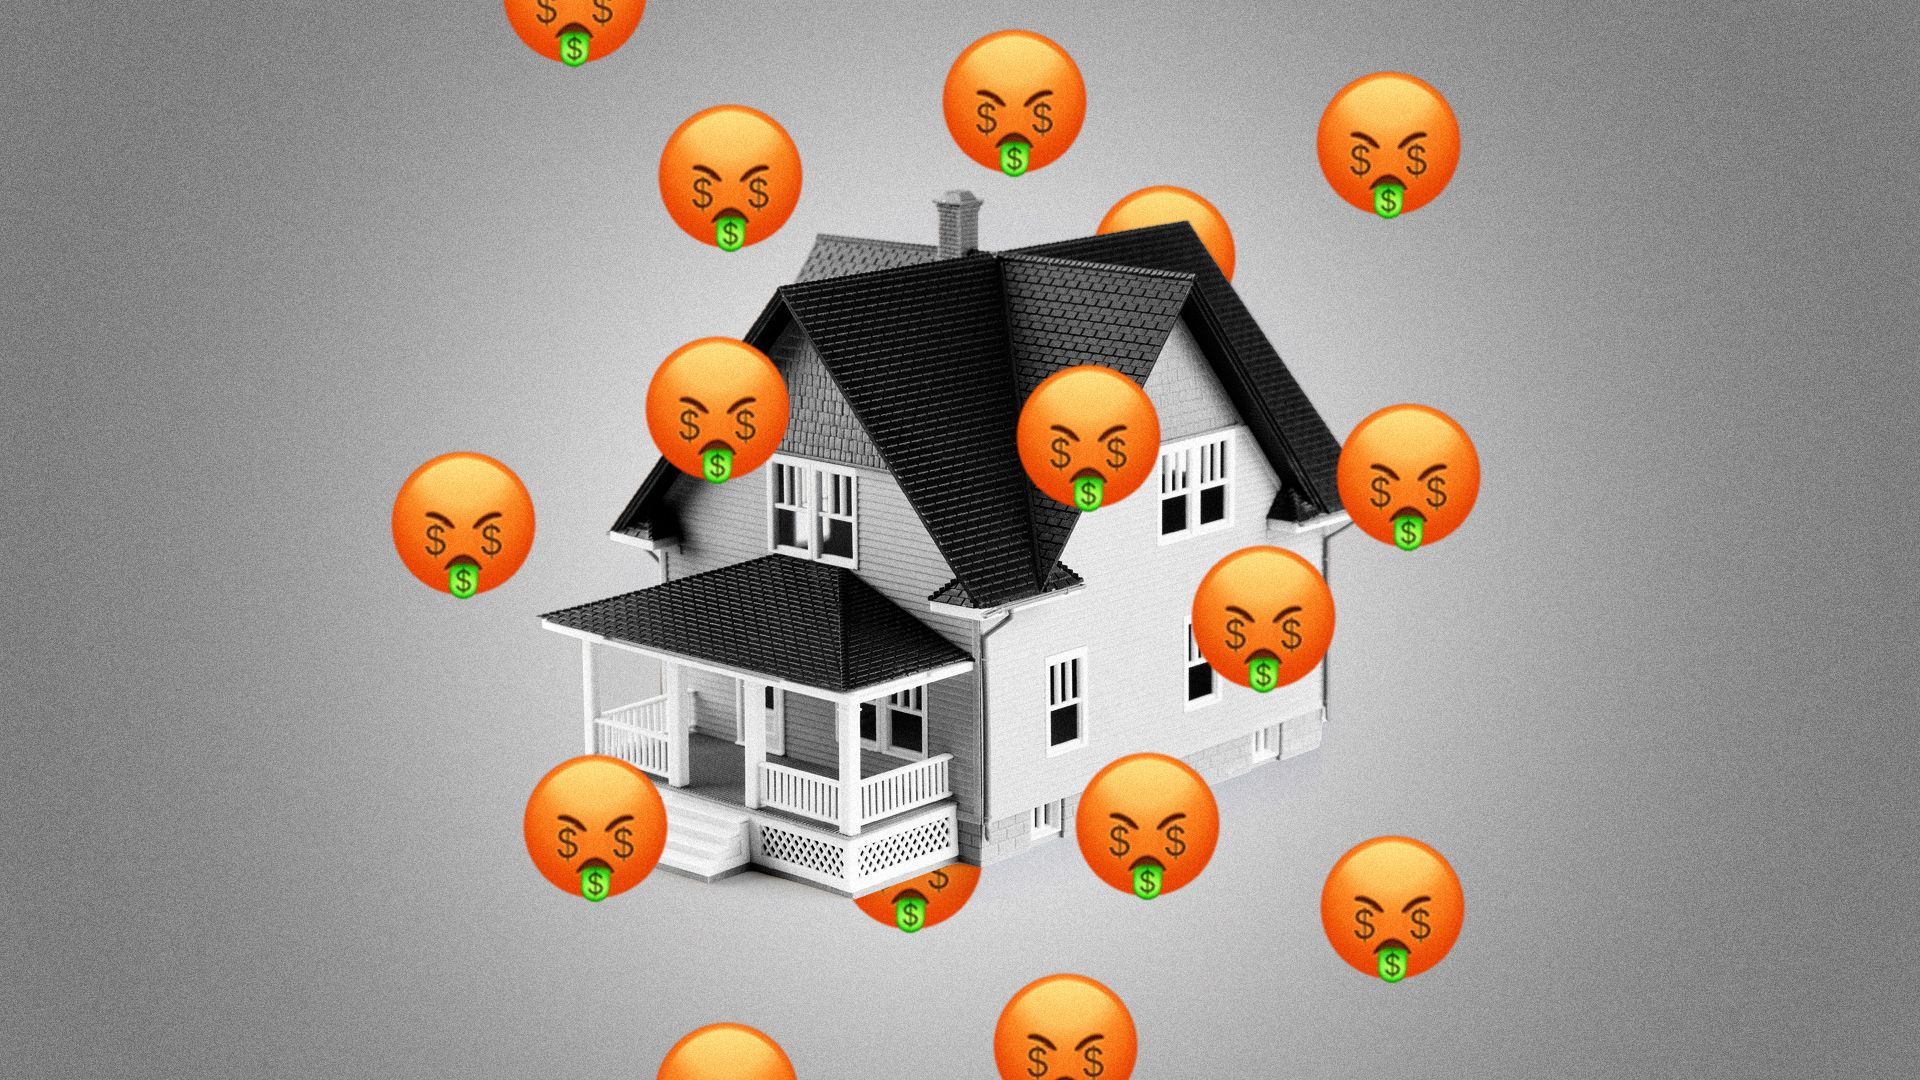 Illustration of a house surrounded by angry emojis with dollar sign eyes and tongue